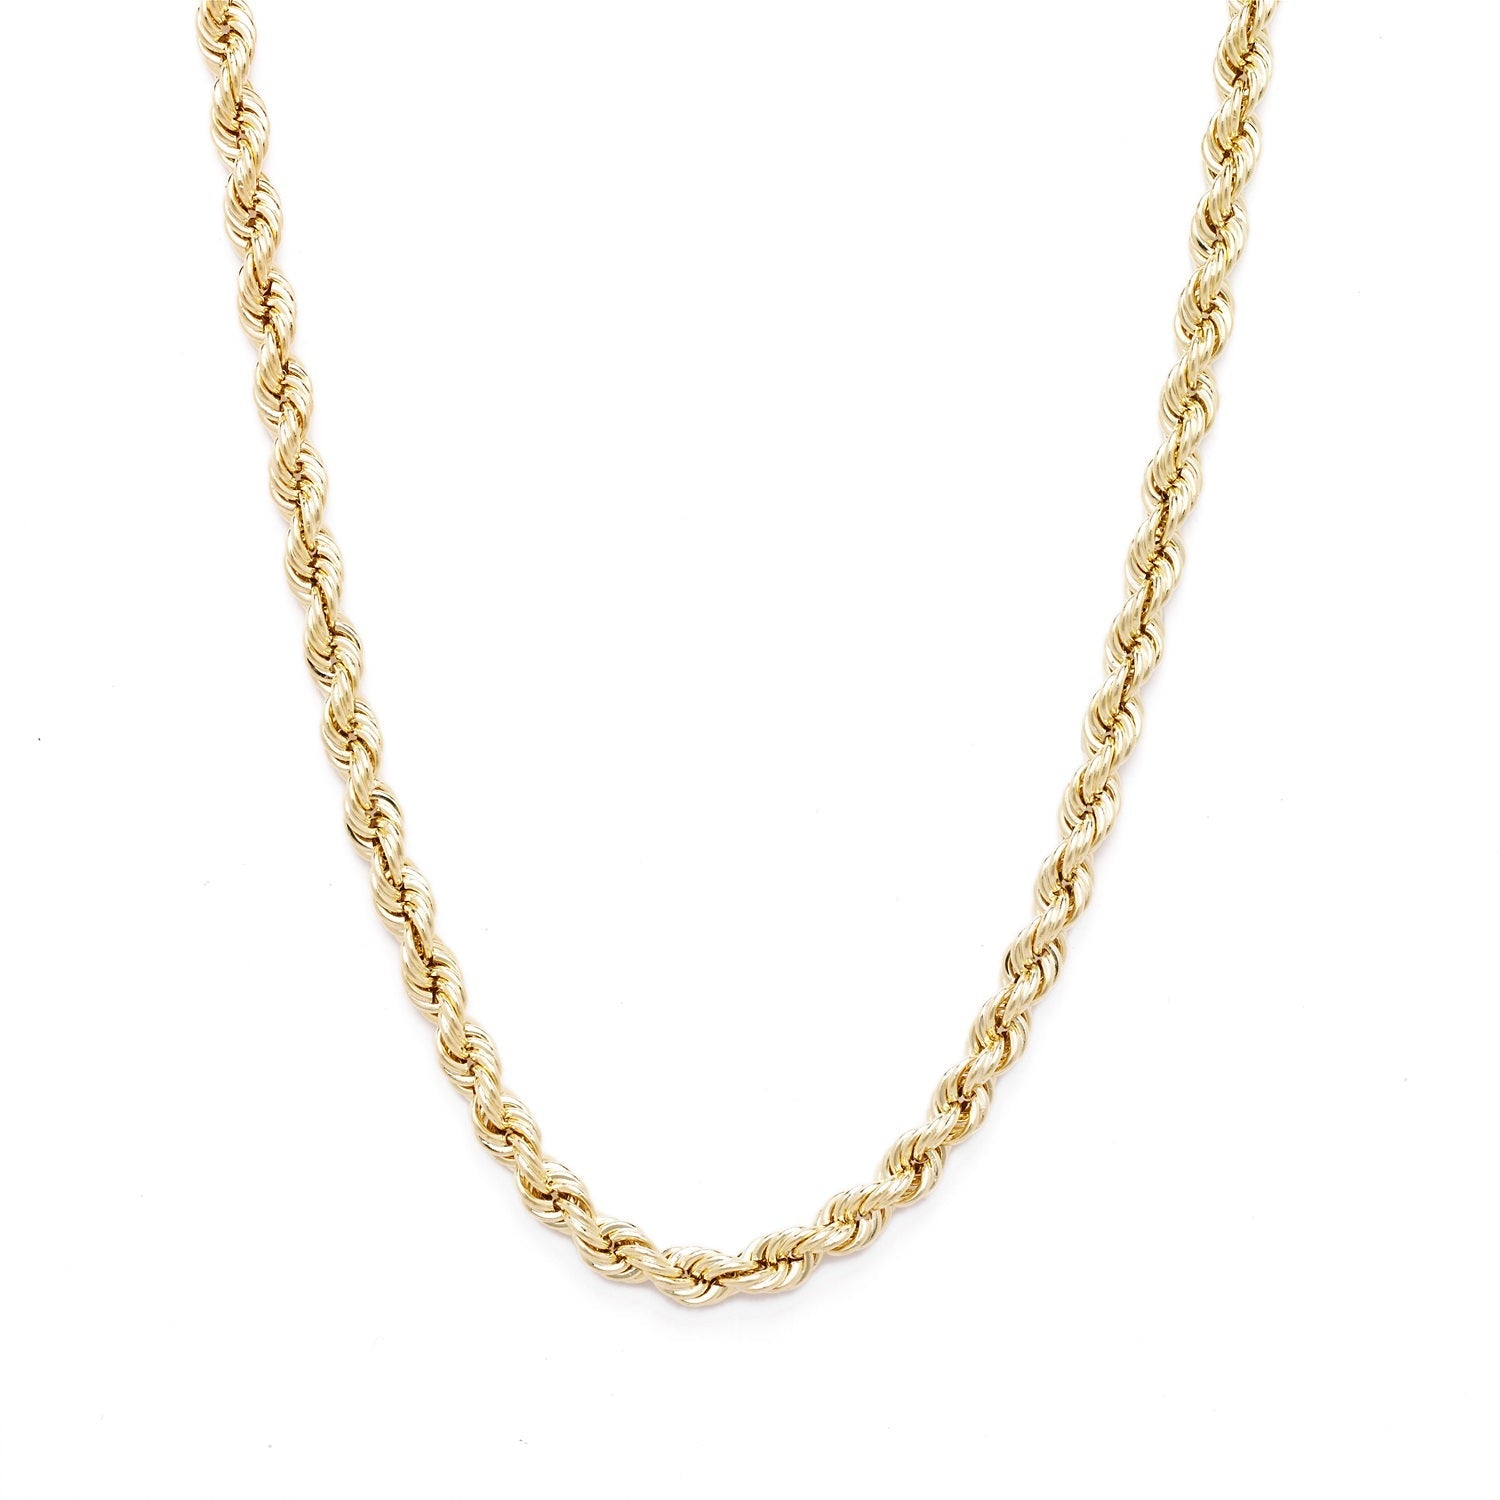 10k Yellow Gold Hollow Rope Chain Necklace with Lobster Claw Clasp, 2mm